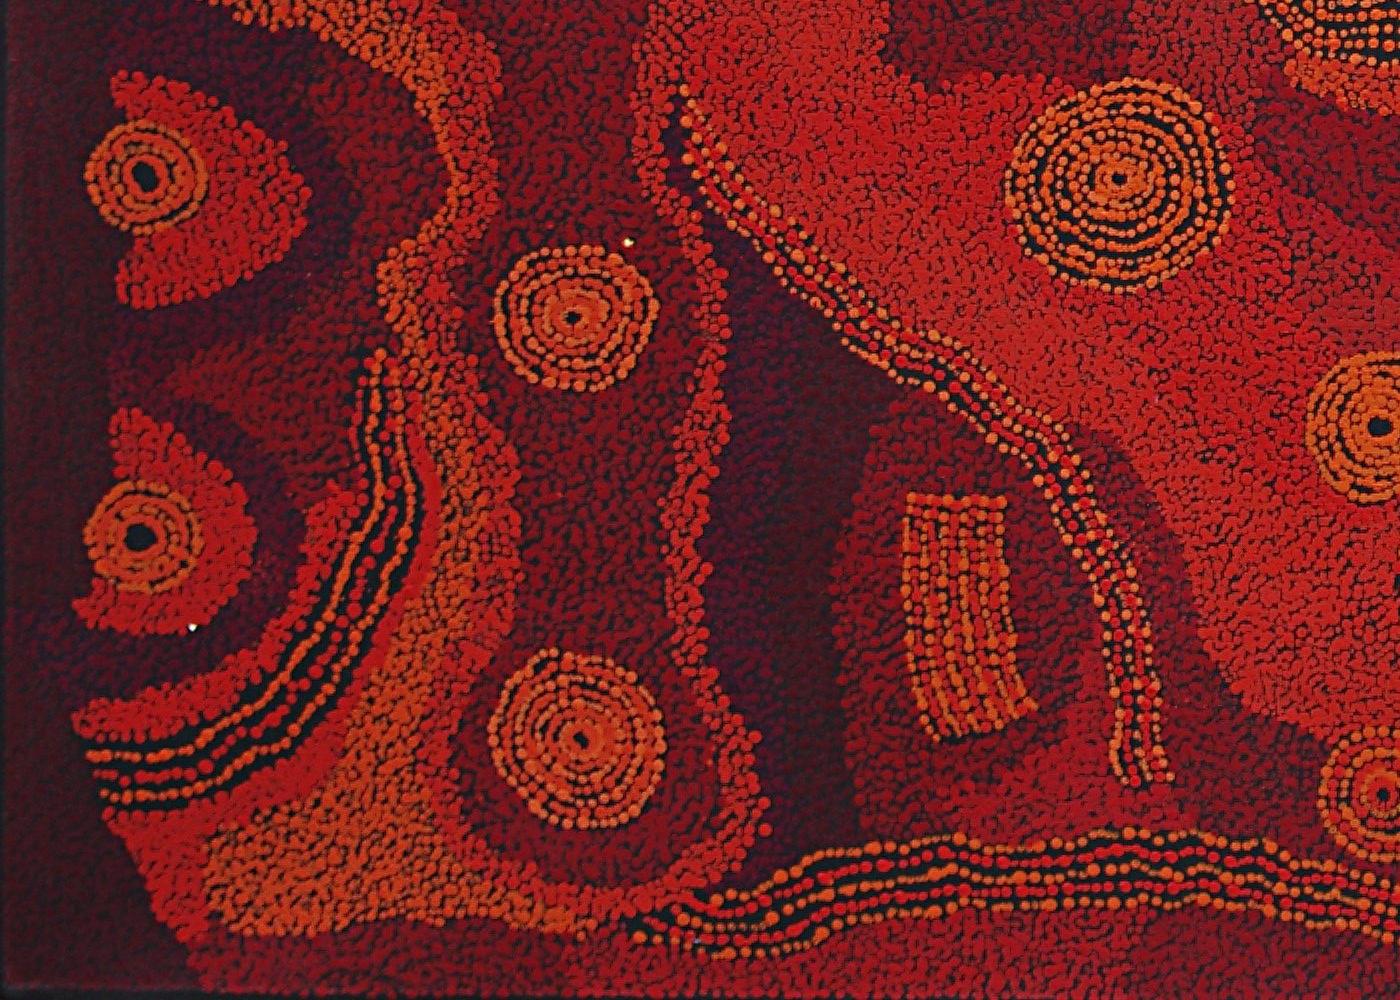 Australian Aboriginal Art, Seven Sisters red painting traditional Dreaming story - Abstract Painting by Tjungkara Ken